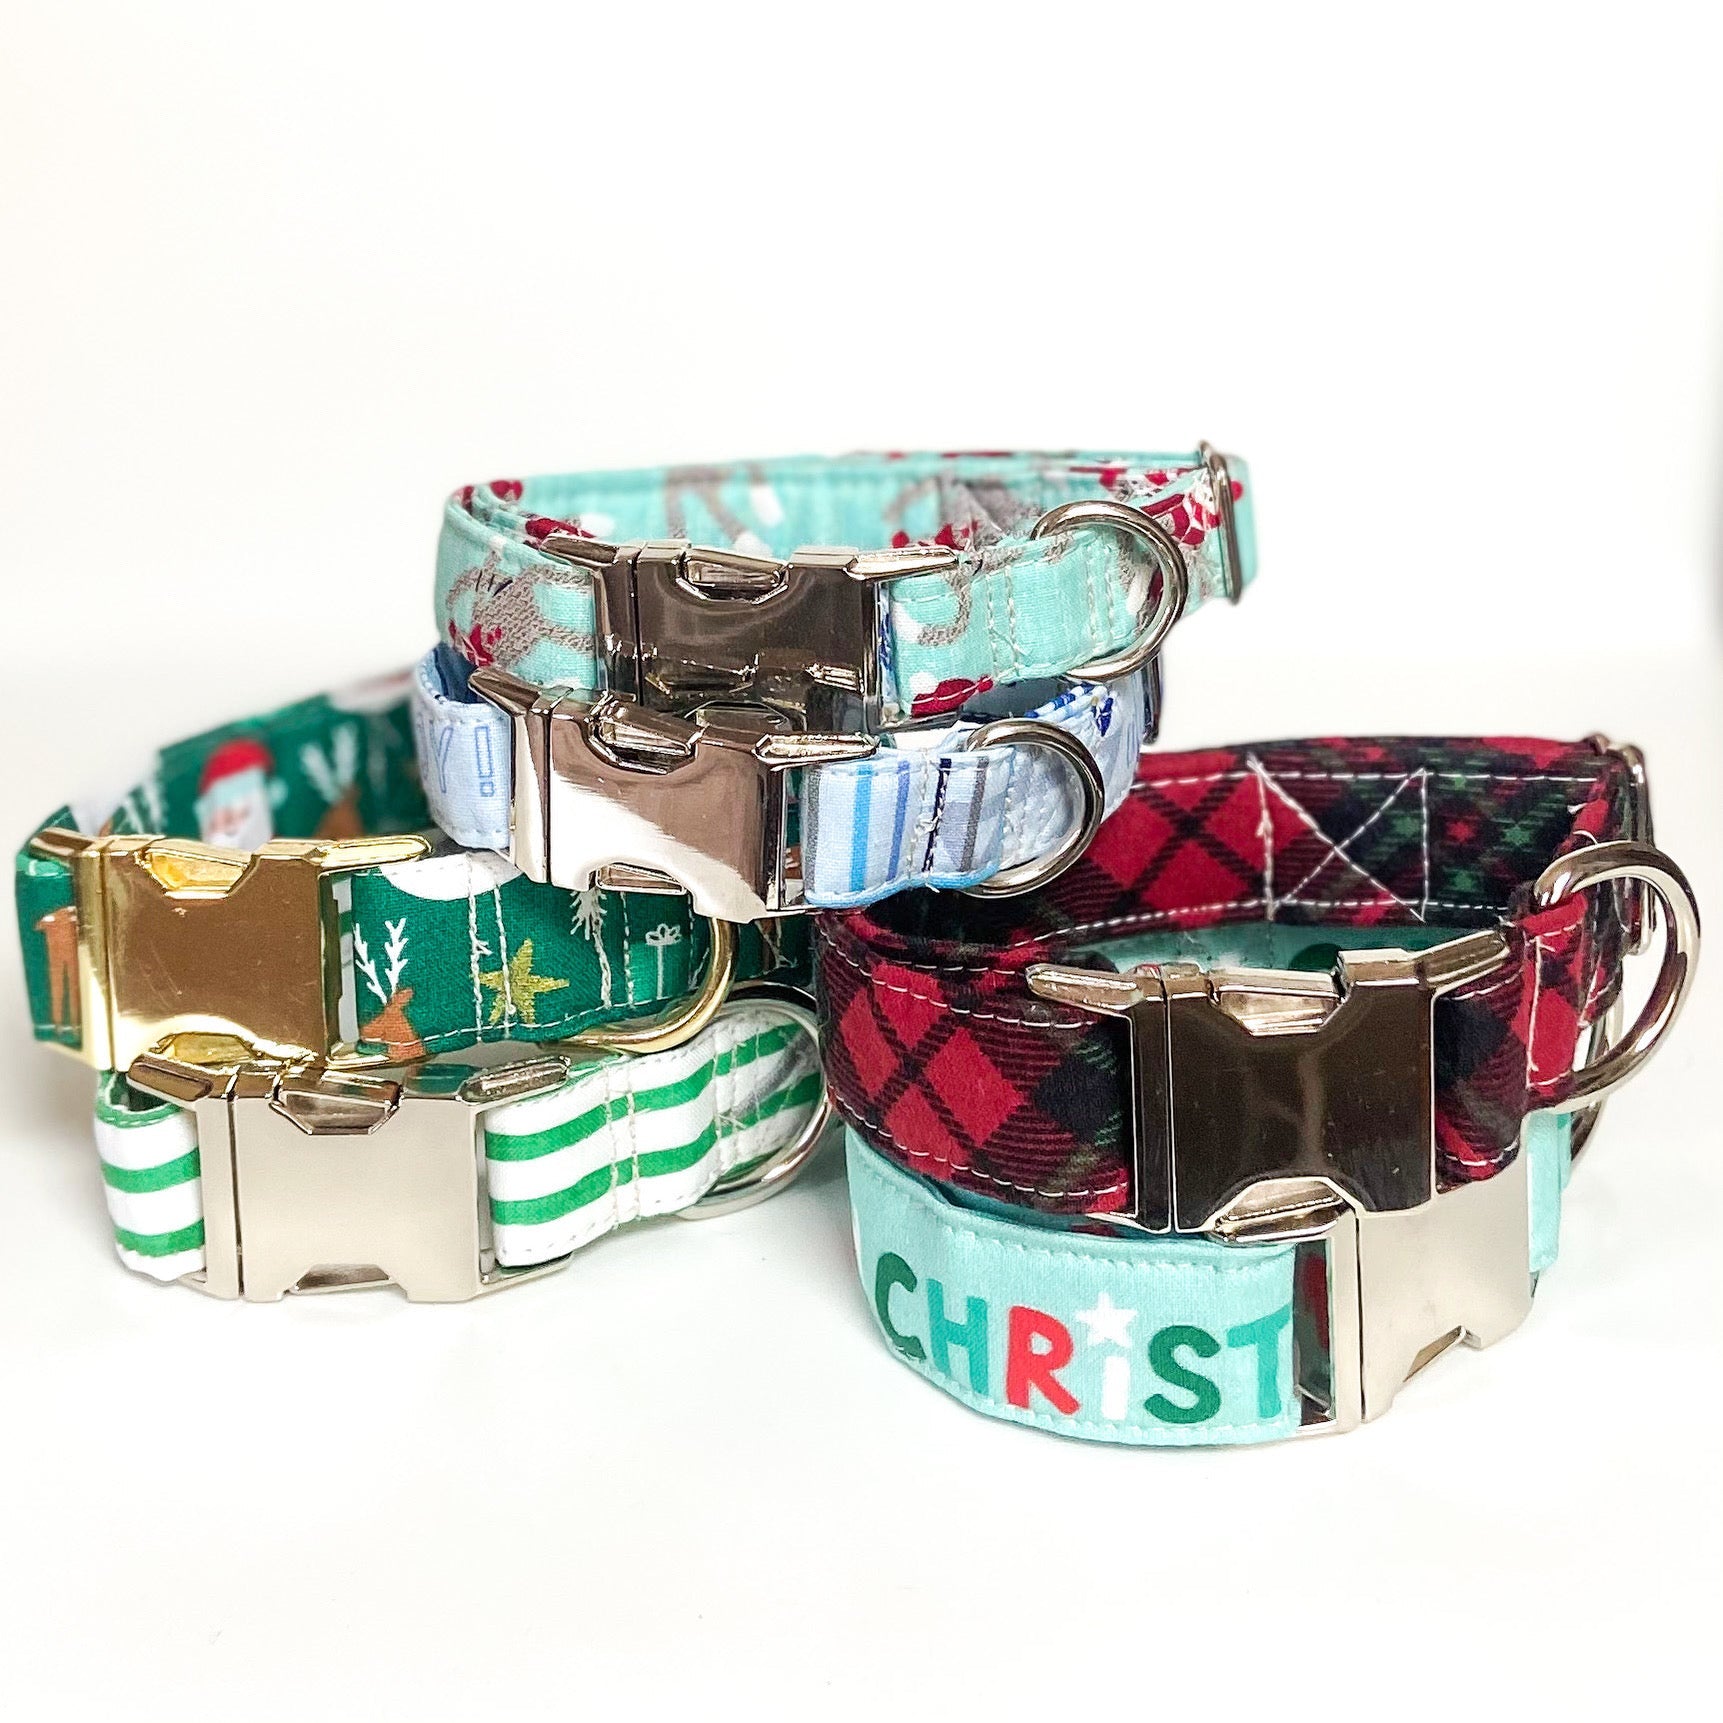 Winter sock monkey dog collar with silver metal buckle